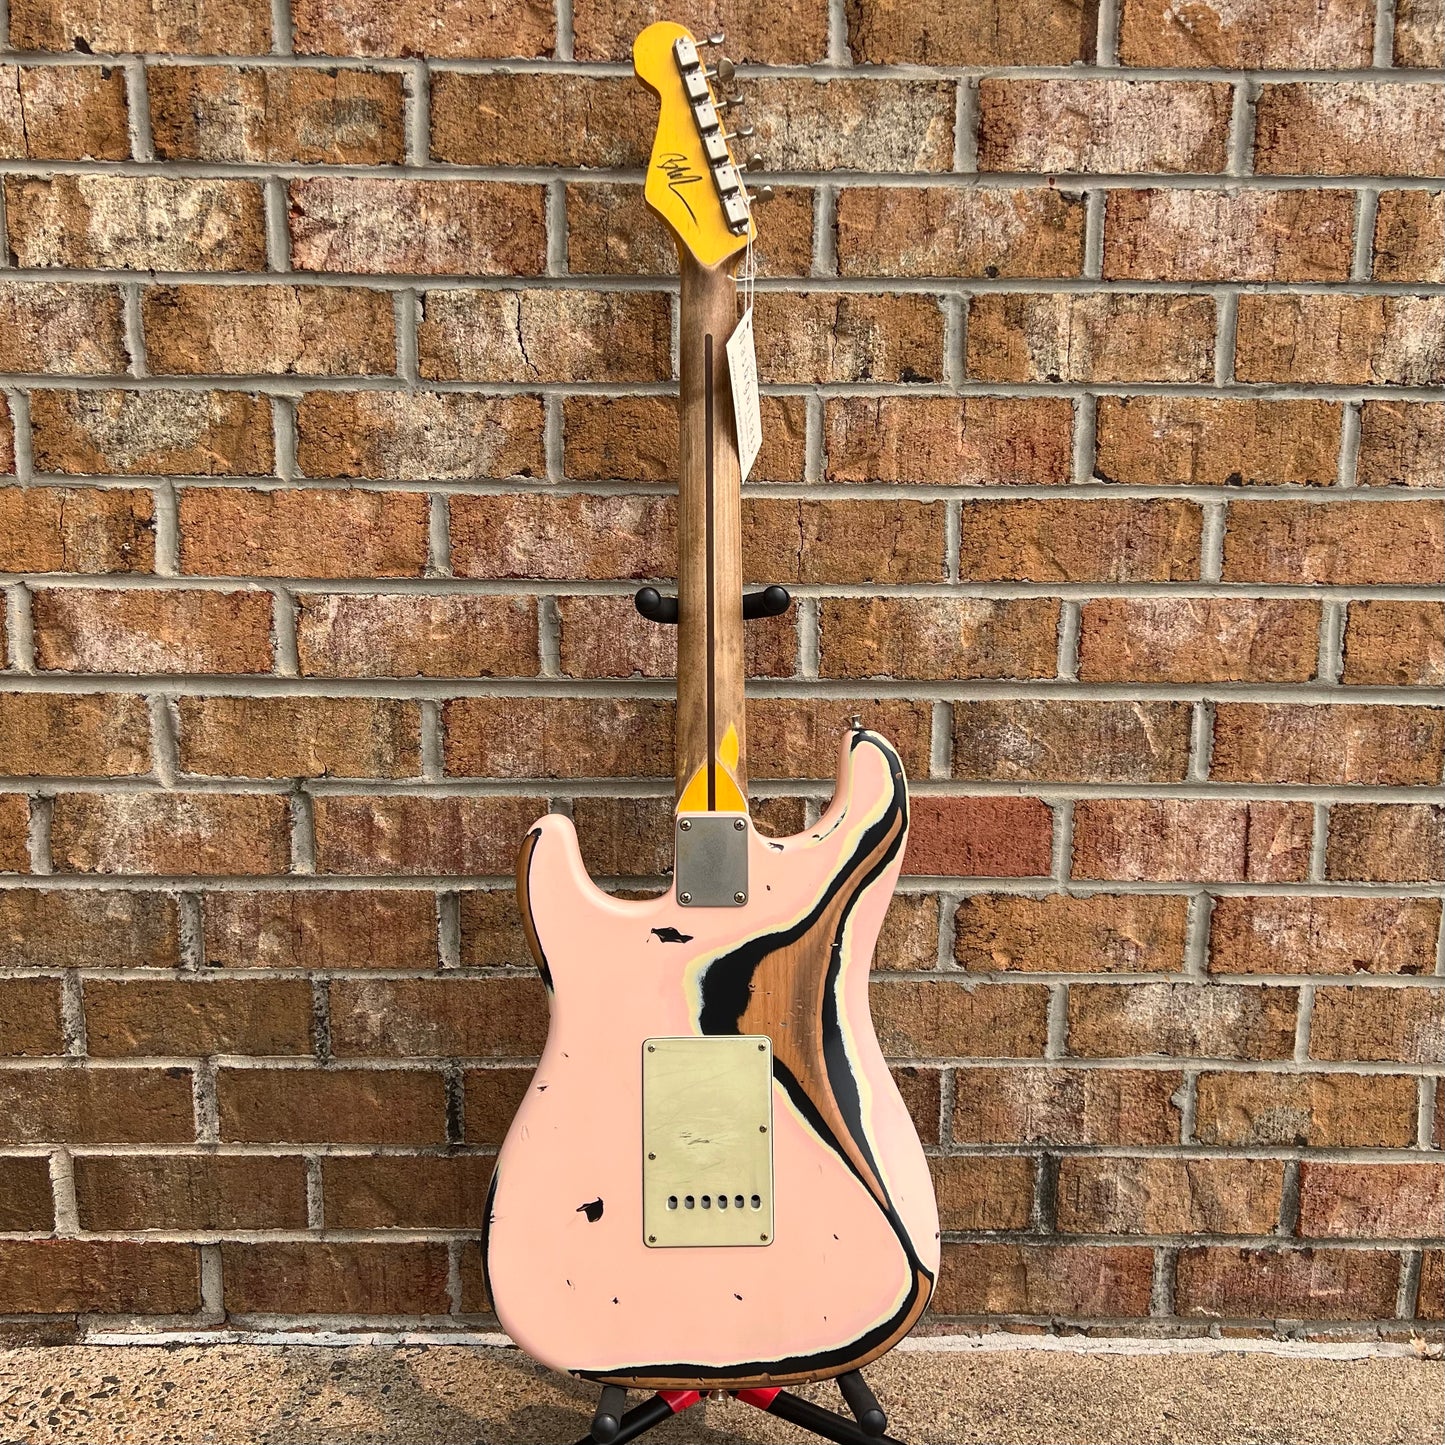 Nash Guitars S-63 Shell Pink over Black Extra Heavy Relic